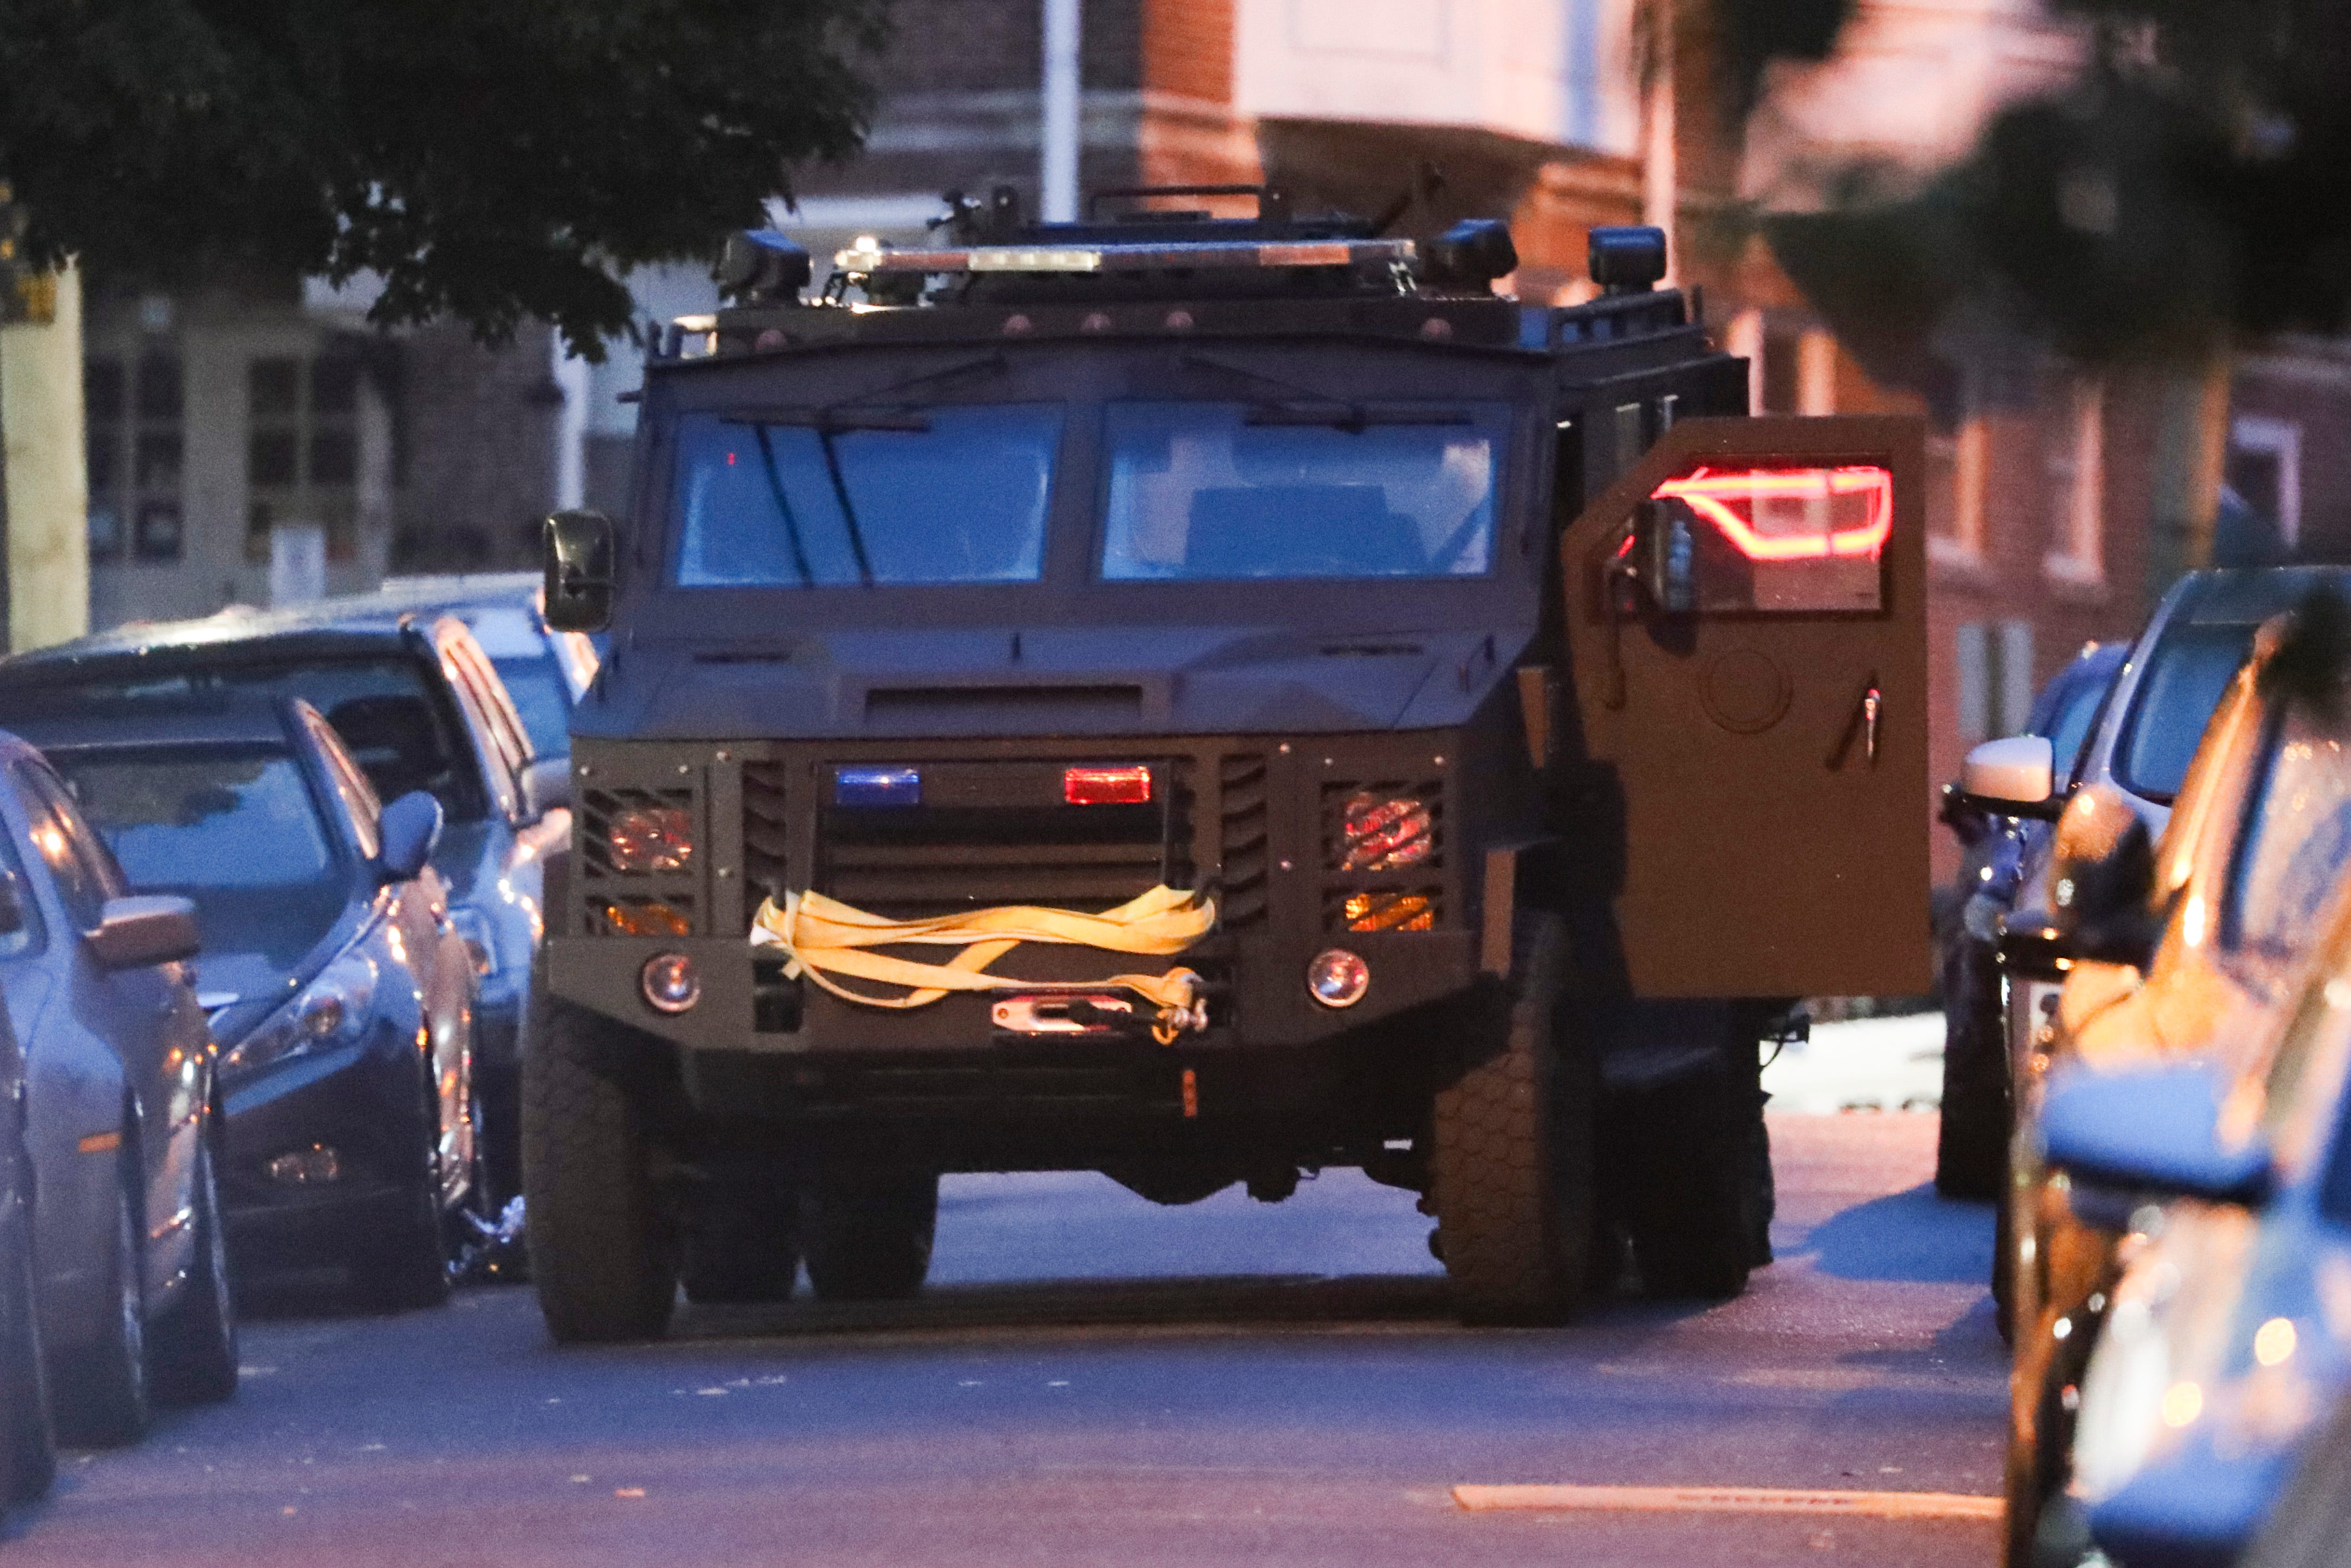 An armored vehicle sits on 25th Street as dawn approaches early Thursday, June 3, 2021 outside the apartment building where three Wilmington police officers were shot in the 2400 block of Market Street late the night before.